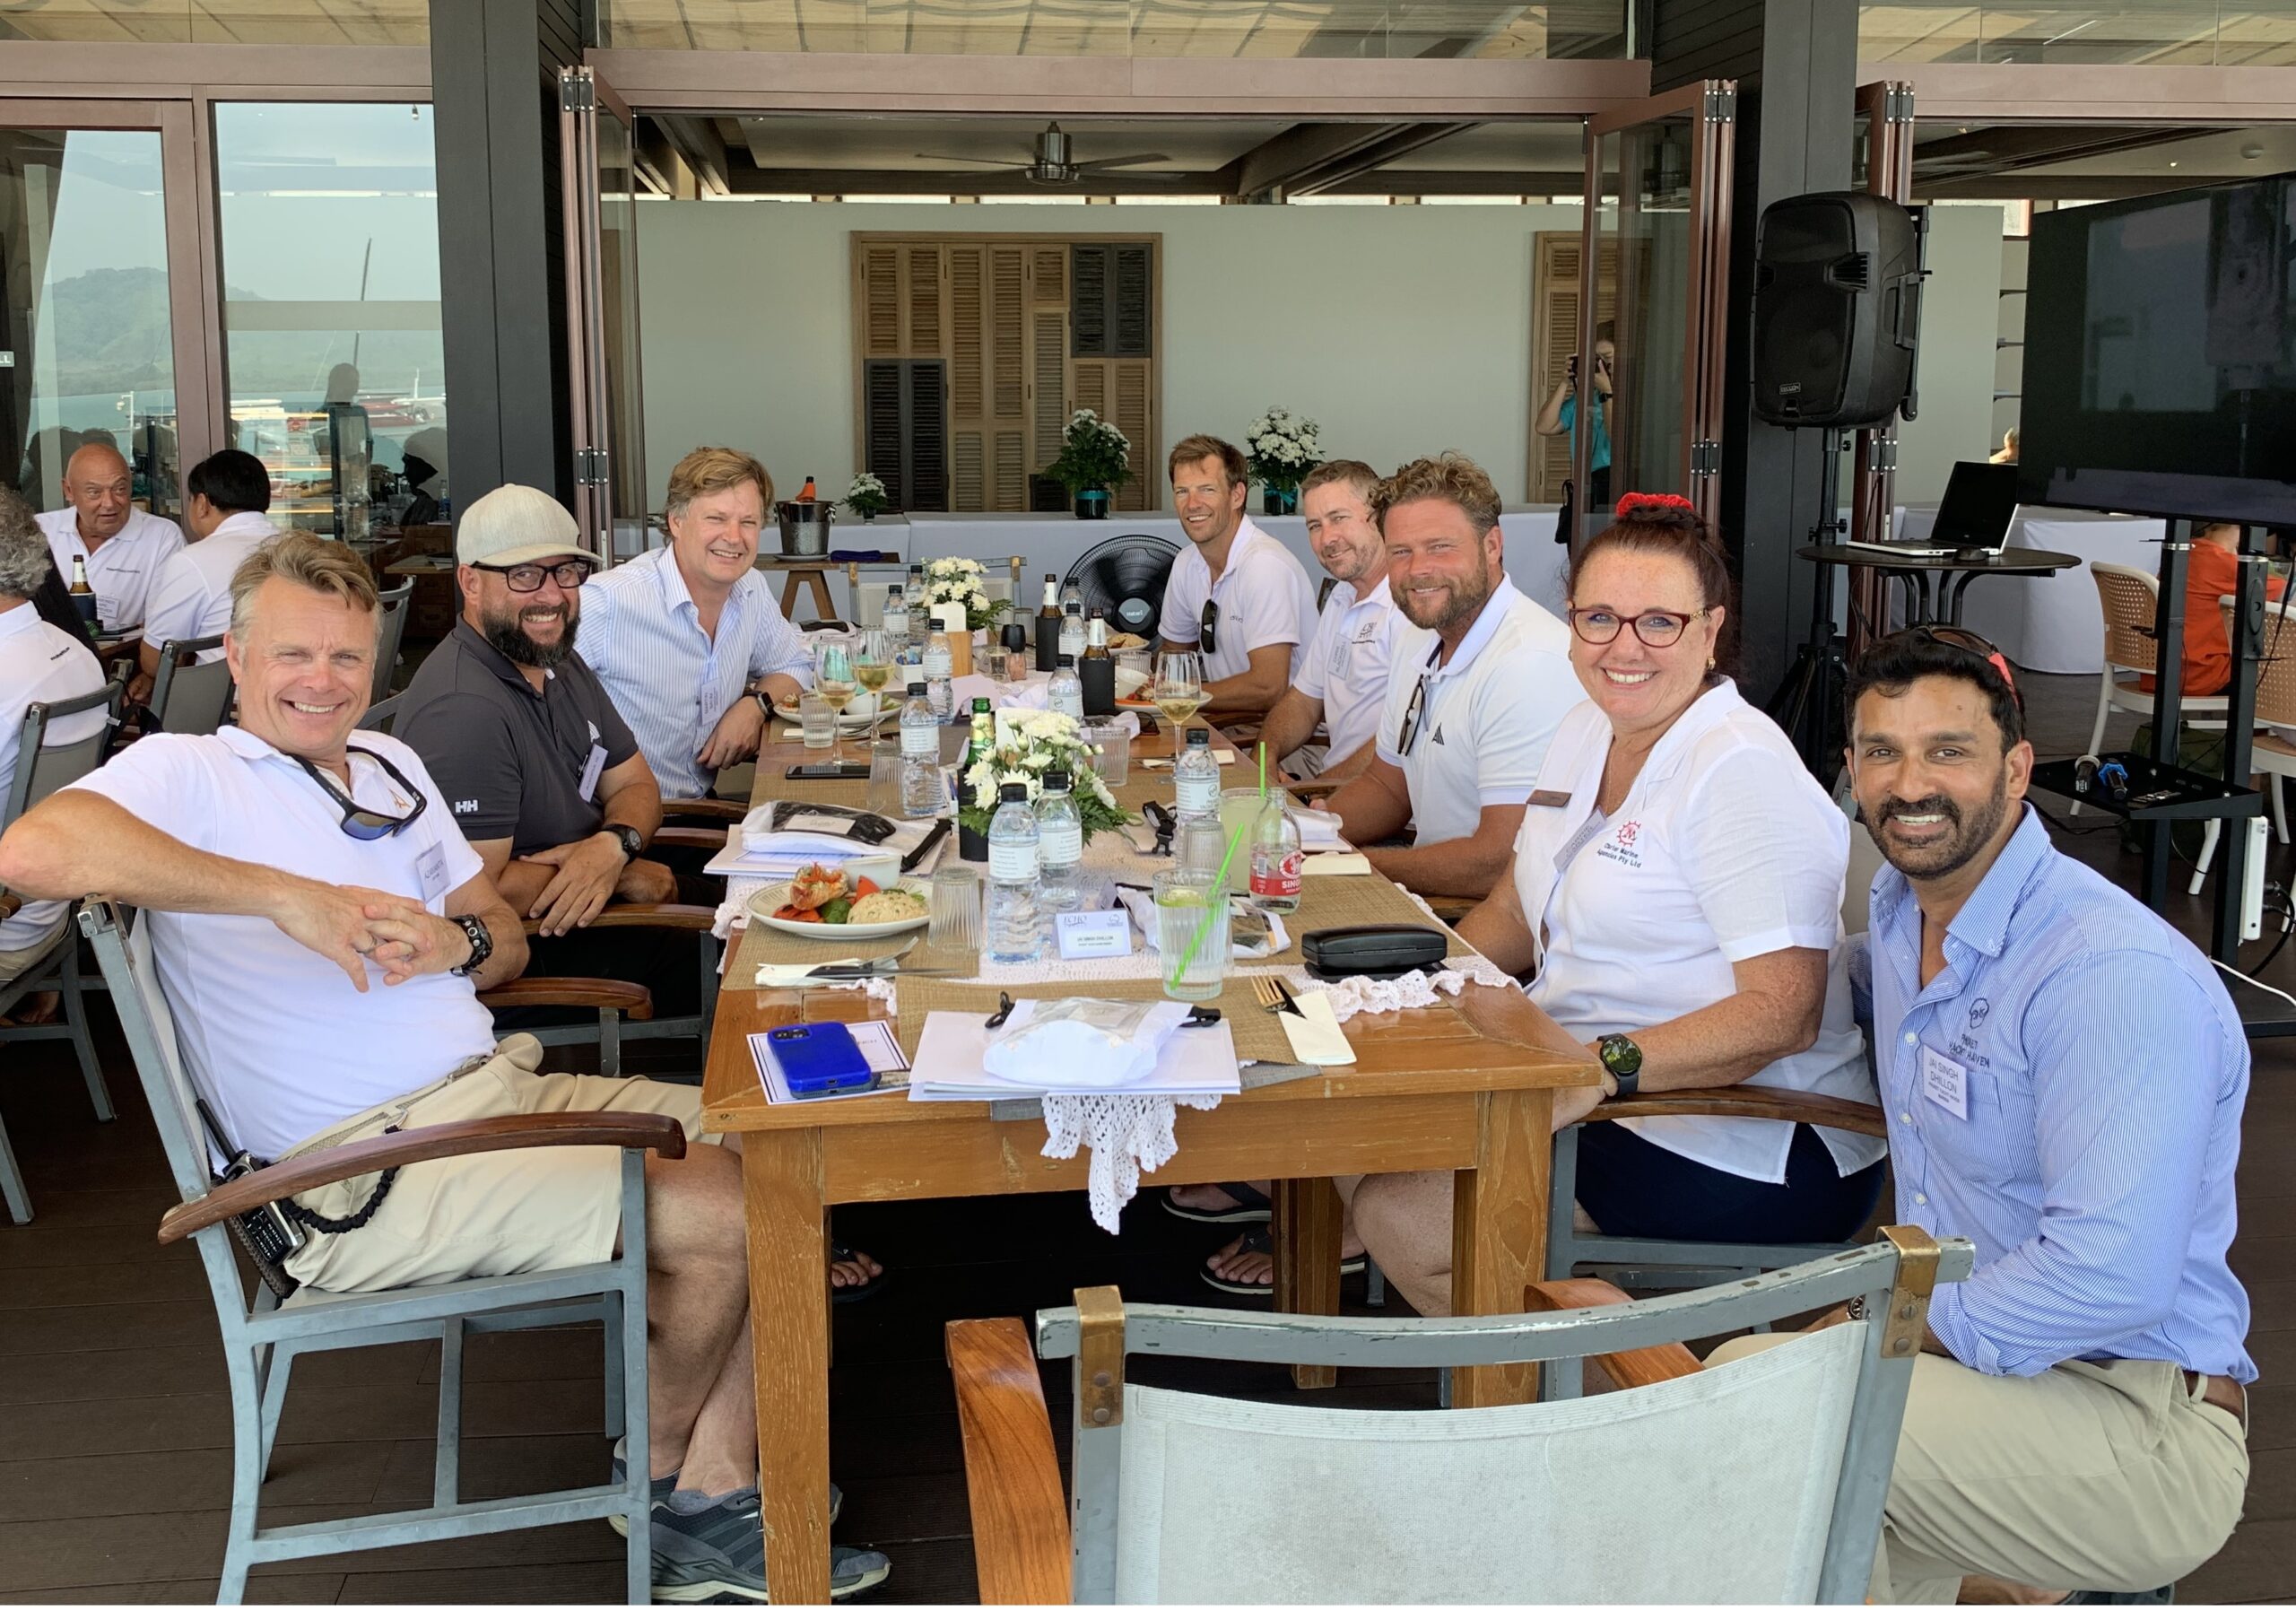 Attendees at Echo Yachts Captains’ Lunch, including Carrie Carter from Carter Marine Agencies and Chris Blackwell from Echo Yachts